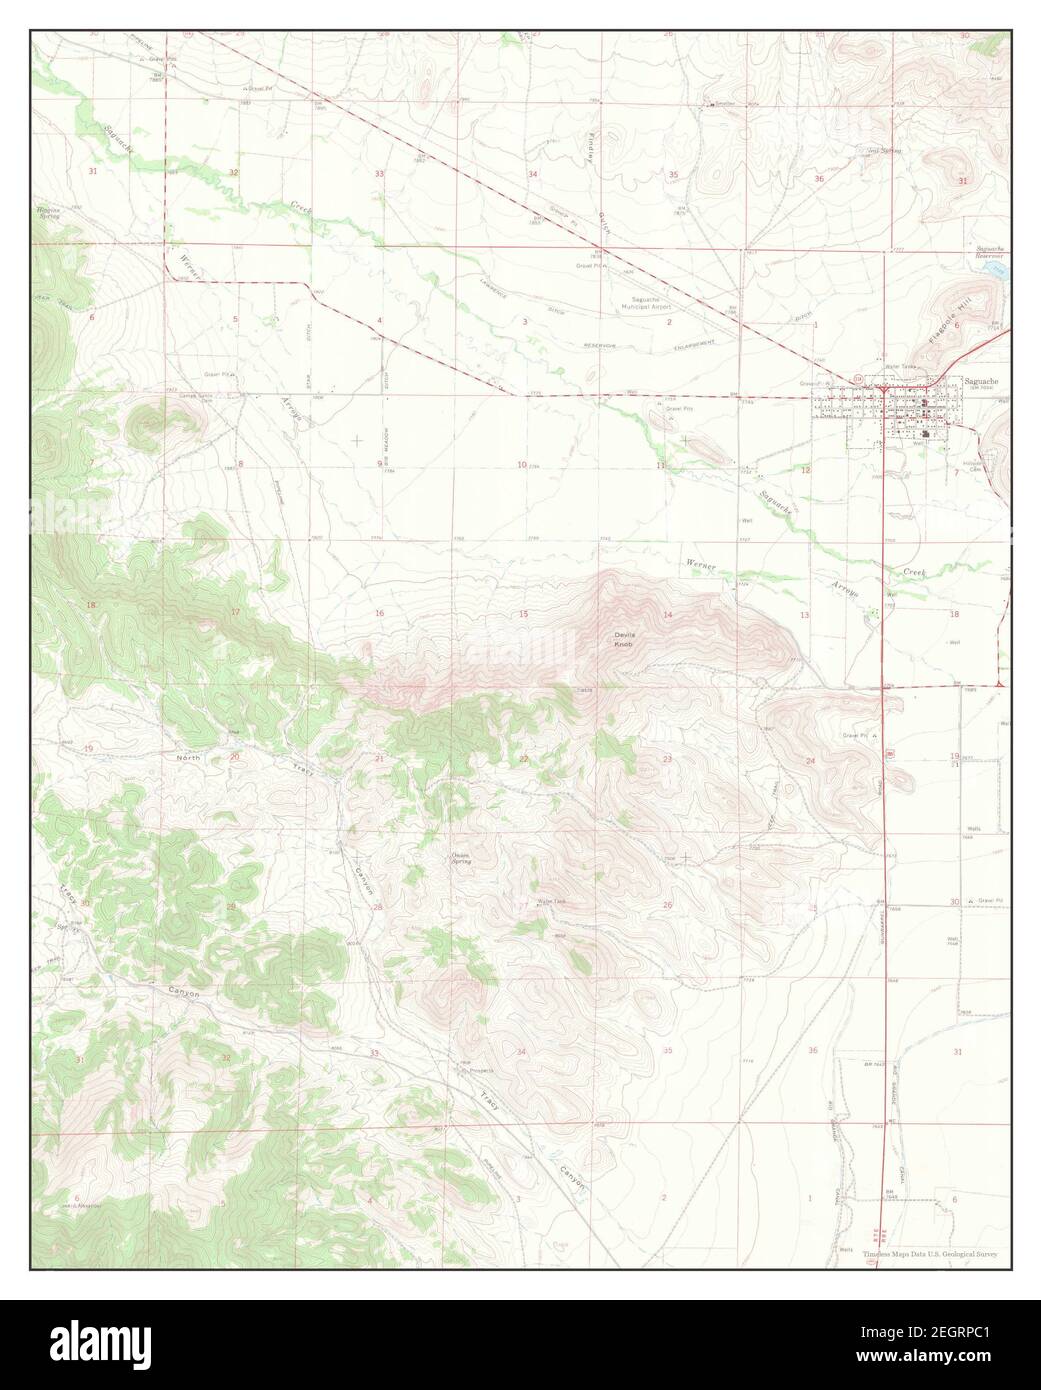 Saguache, Colorado, map 1967, 1:24000, United States of America by Timeless Maps, data U.S. Geological Survey Stock Photo